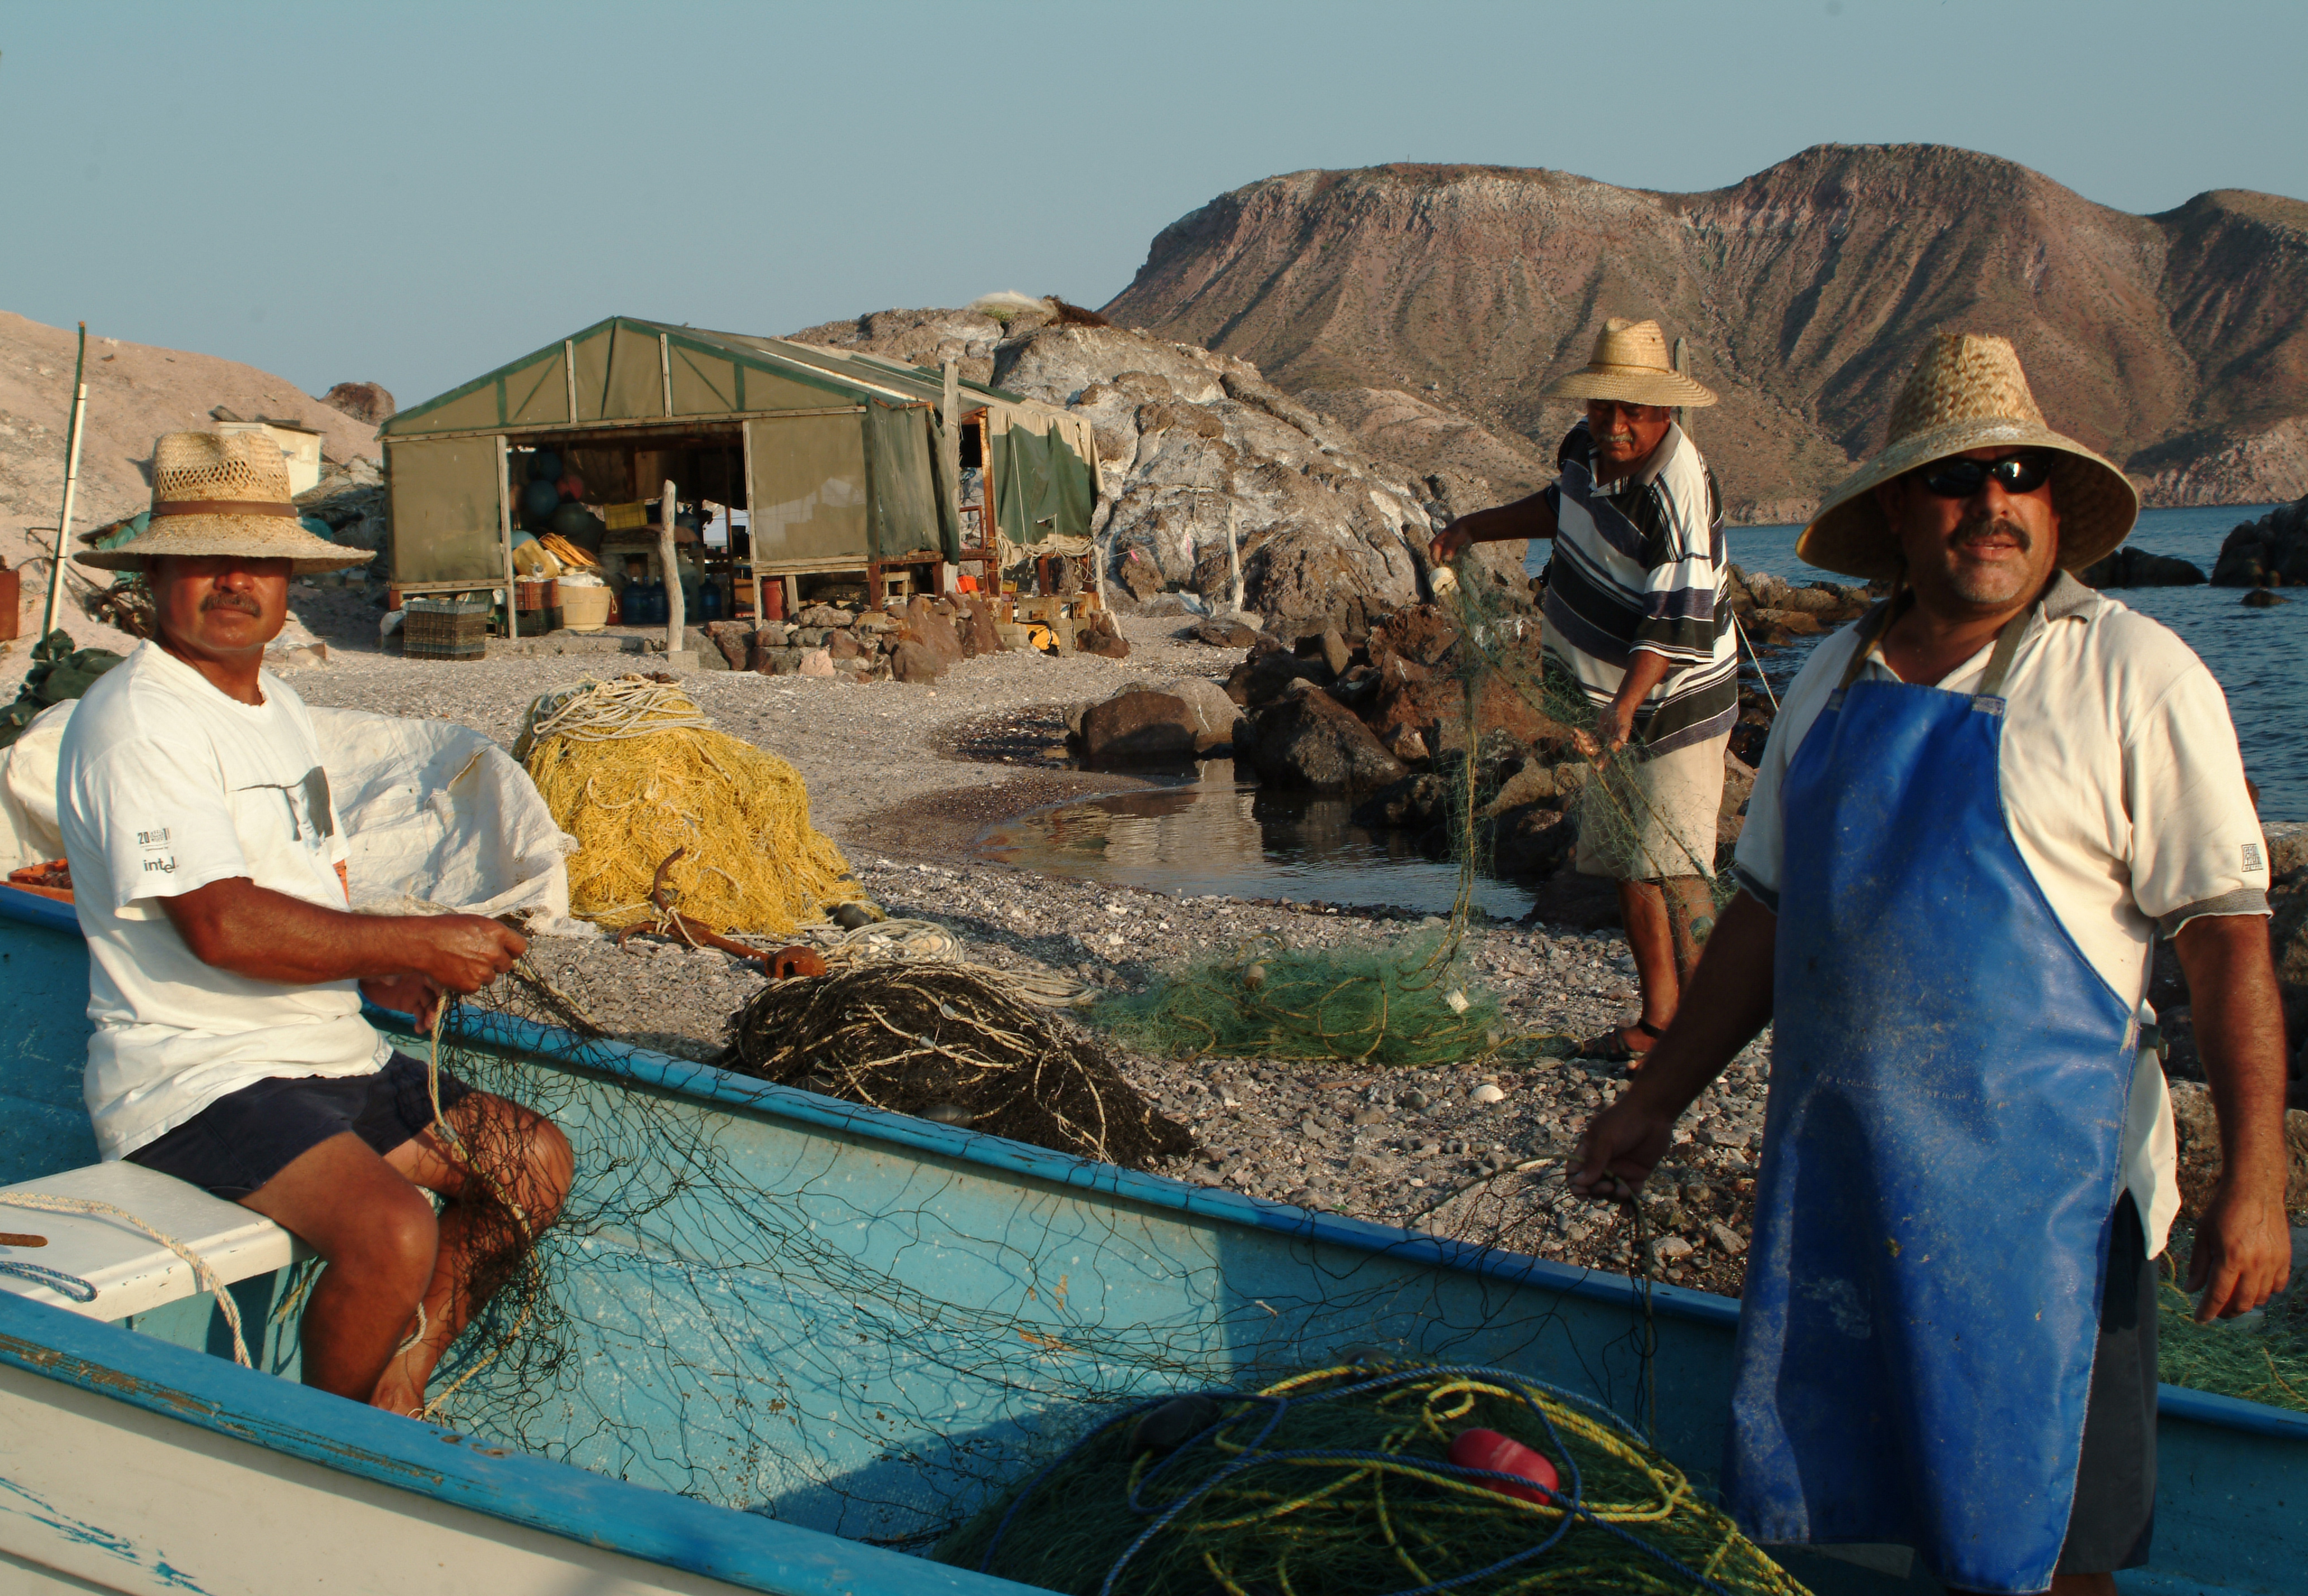 Every day the fishermen had to mend their nets before setting out.